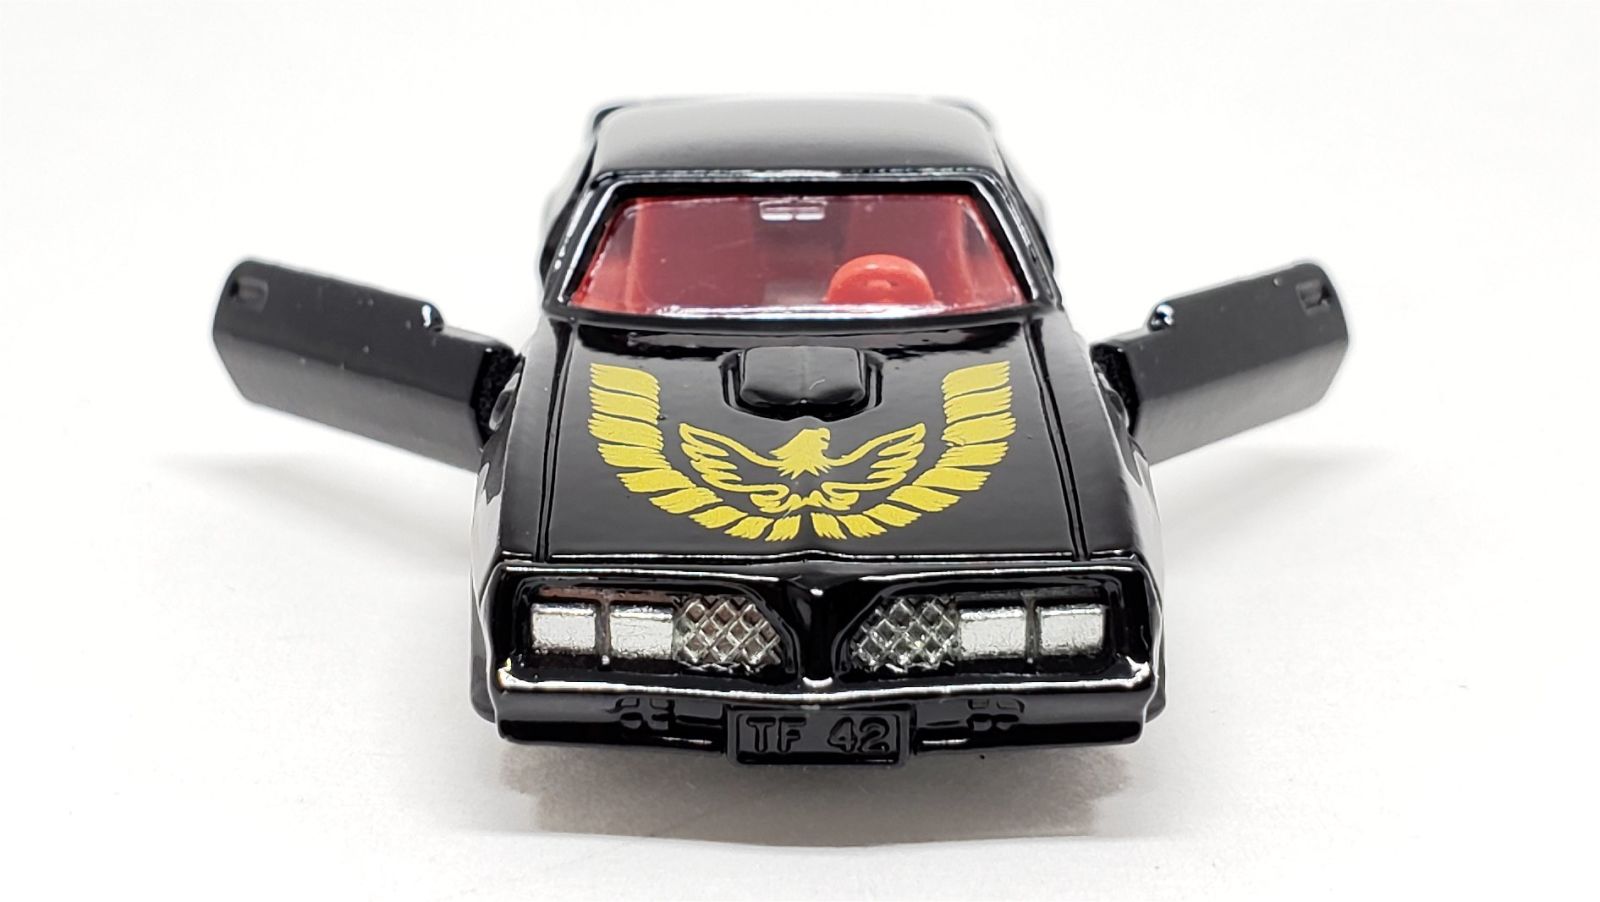 Illustration for article titled [REVIEW] Tomica Pontiac Firebird TransAm